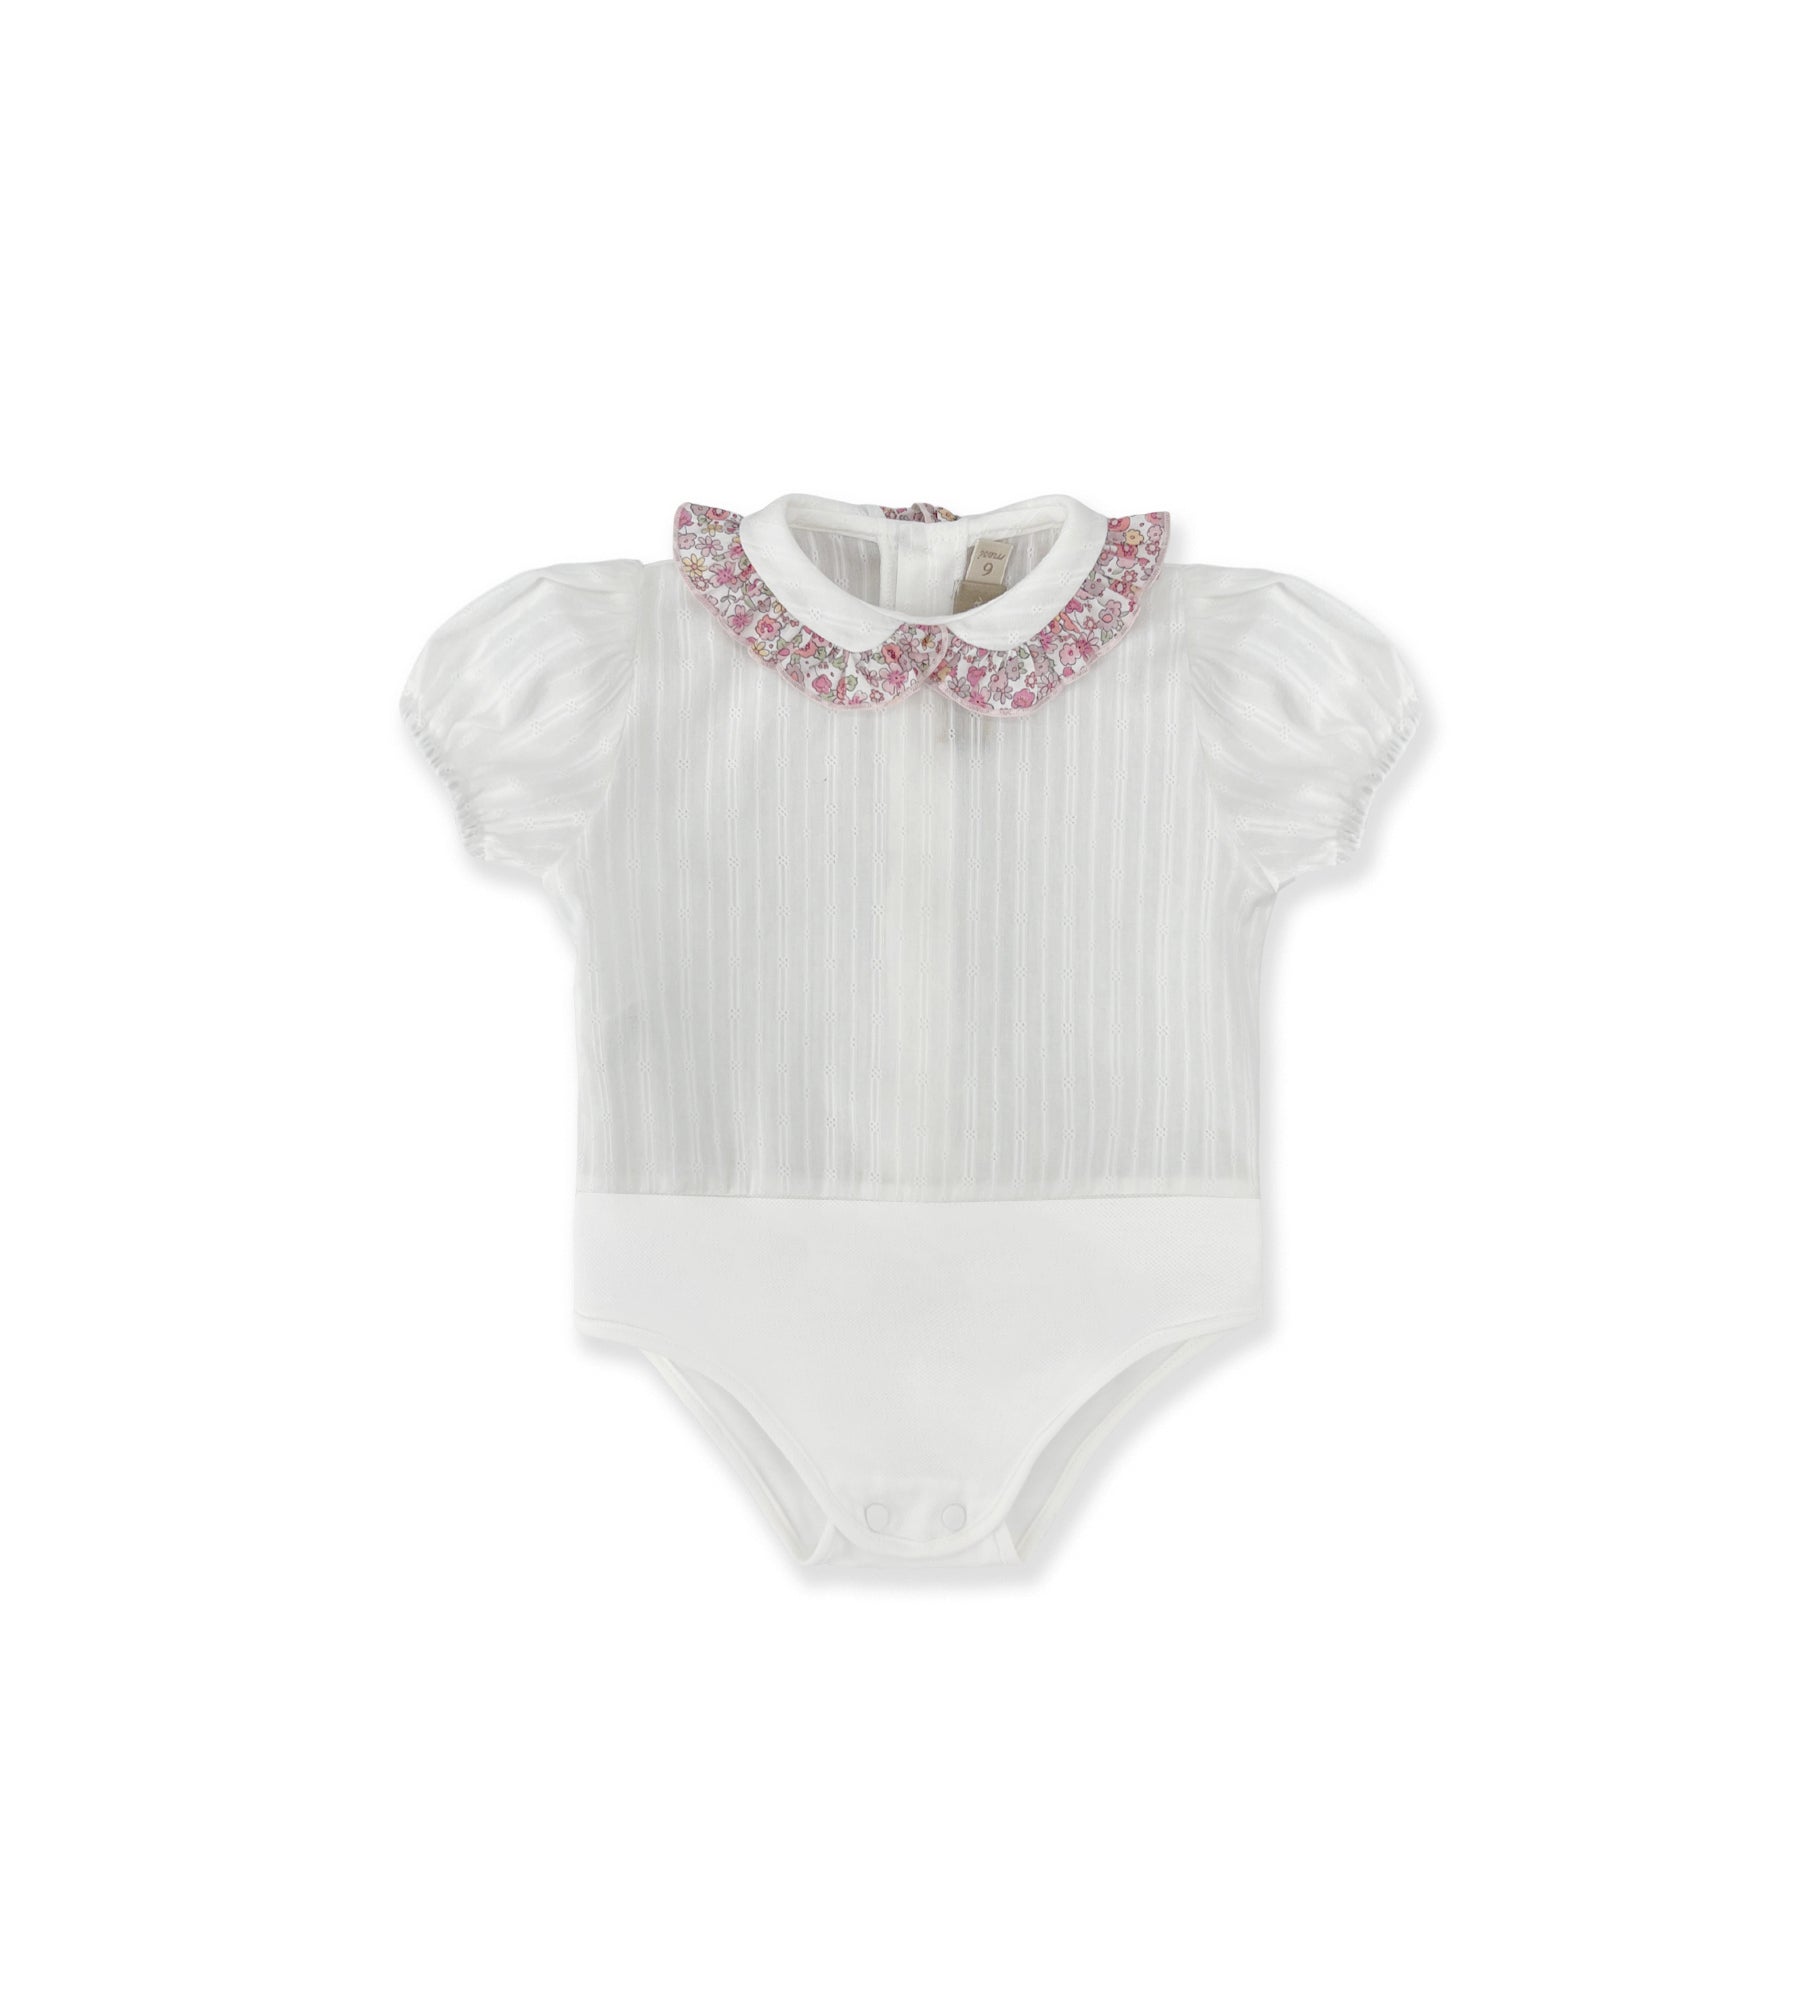 BABY BLOOMERS SET